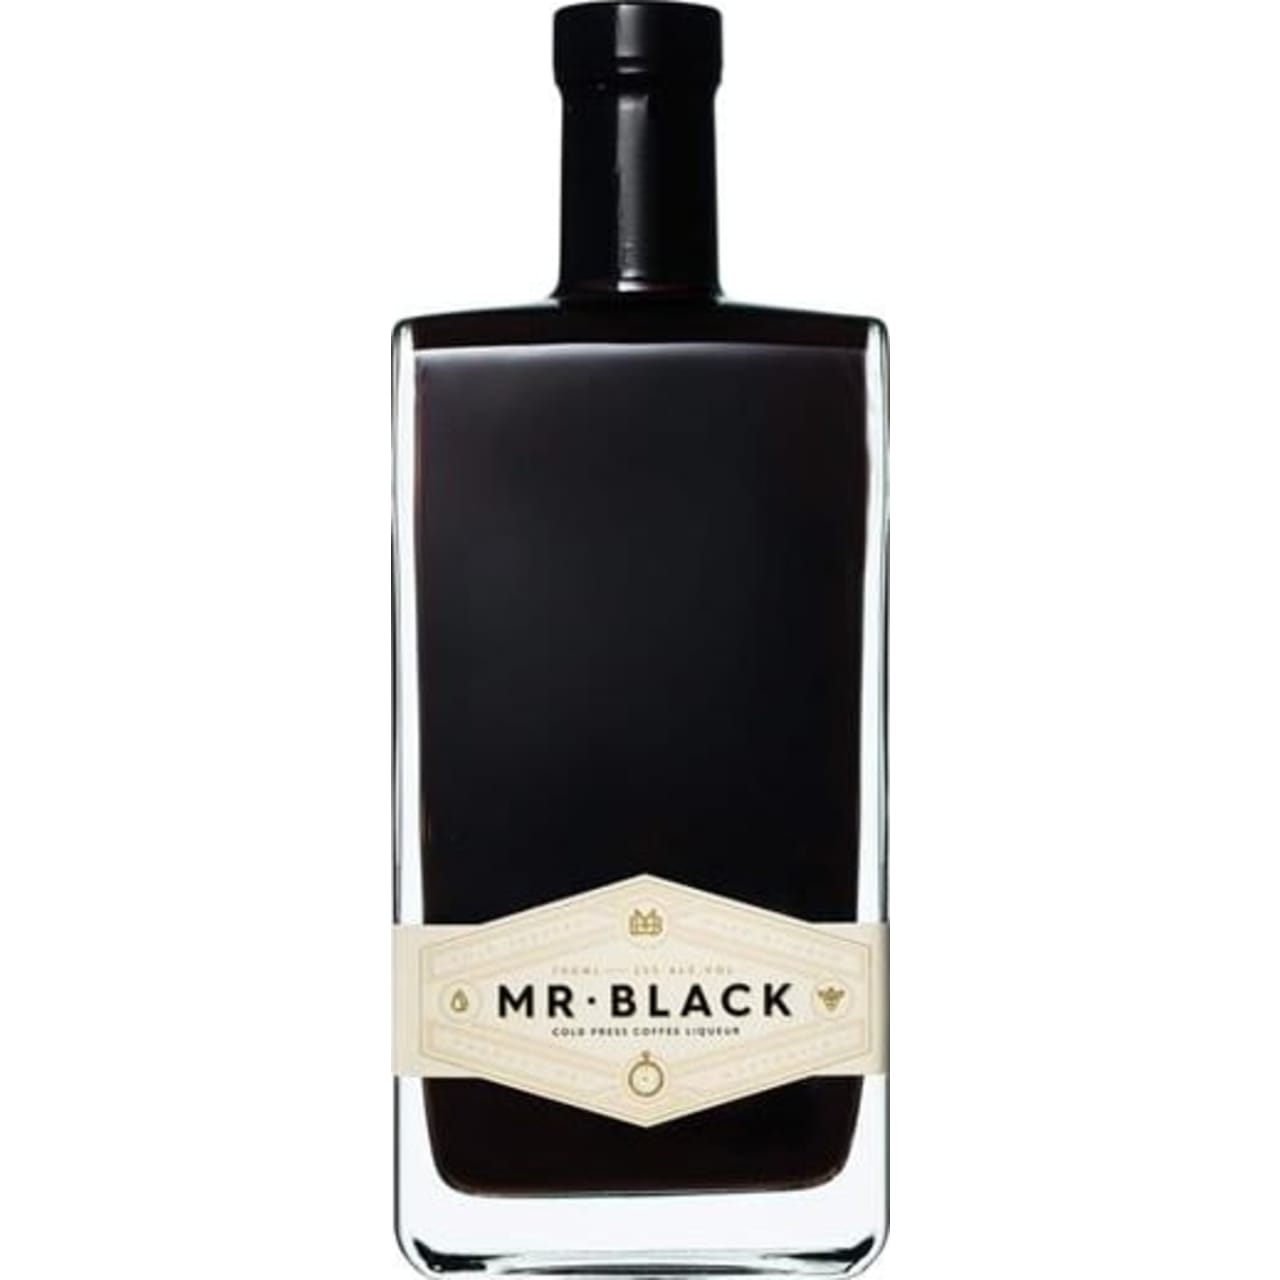 Mr Black Cold Press Coffee is blended with pure Australian grain spirit which allows the rich flavour of the coffee blend to shine through.